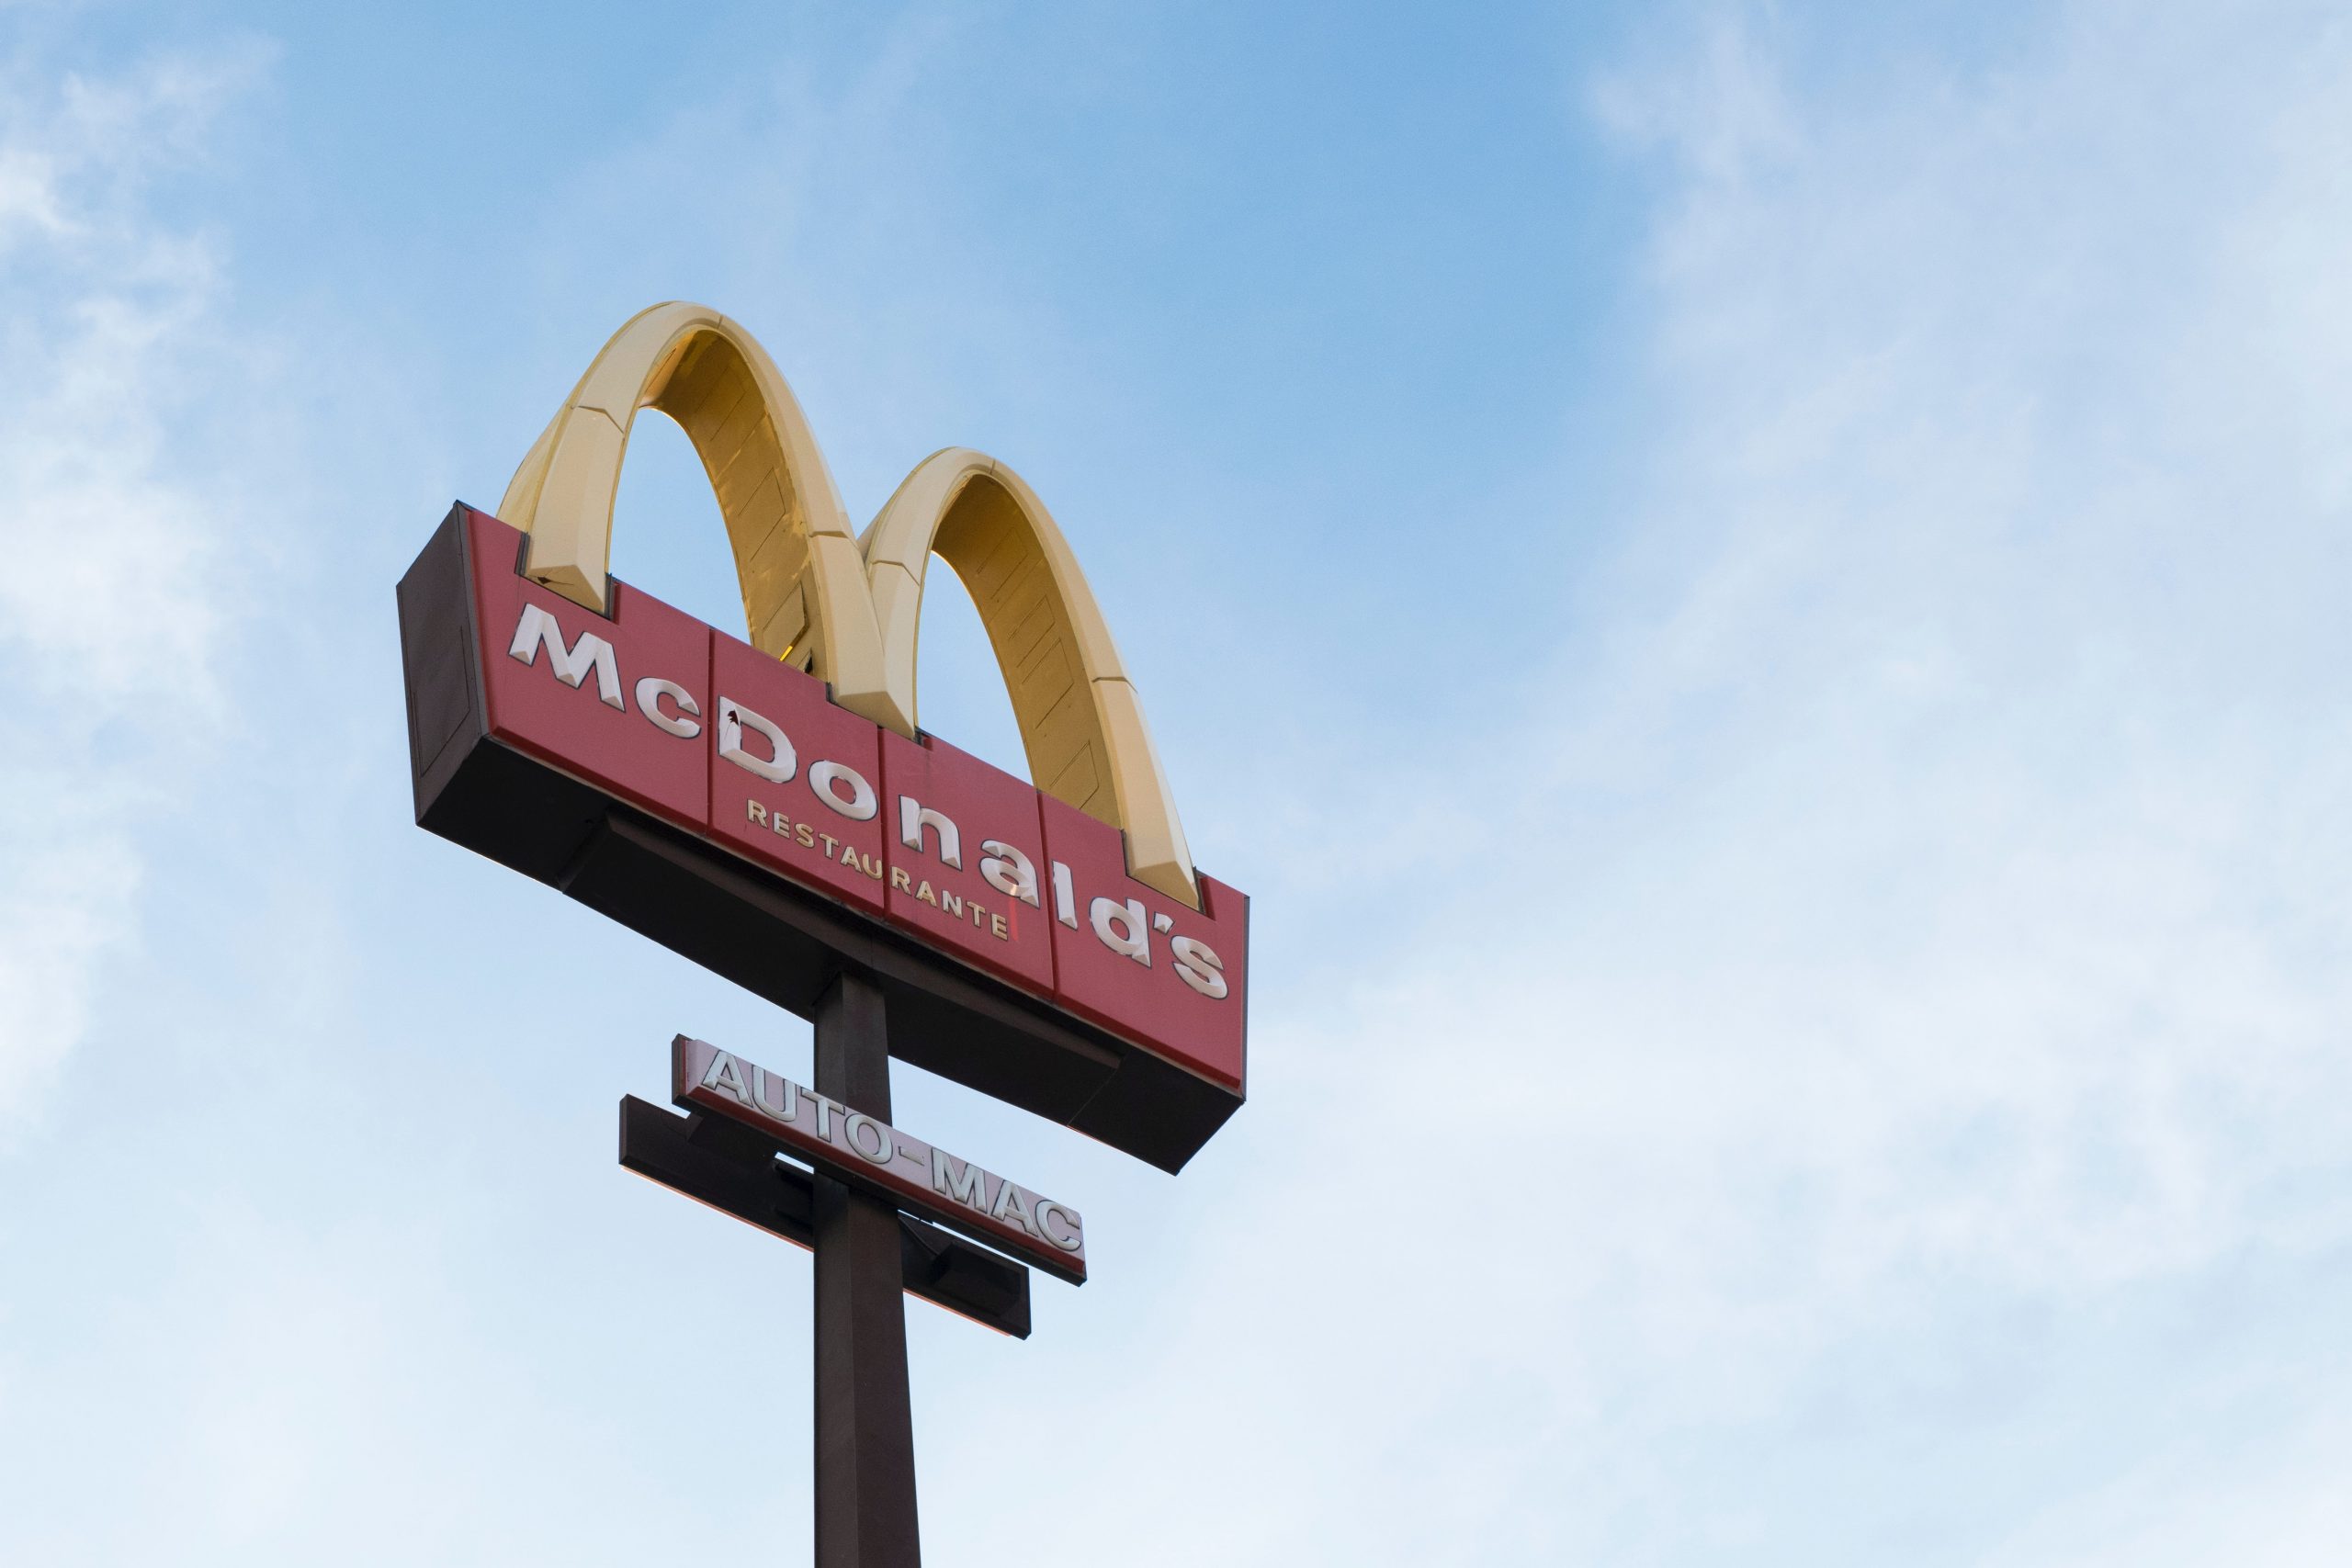 The McDonald's sign against the blue sky.